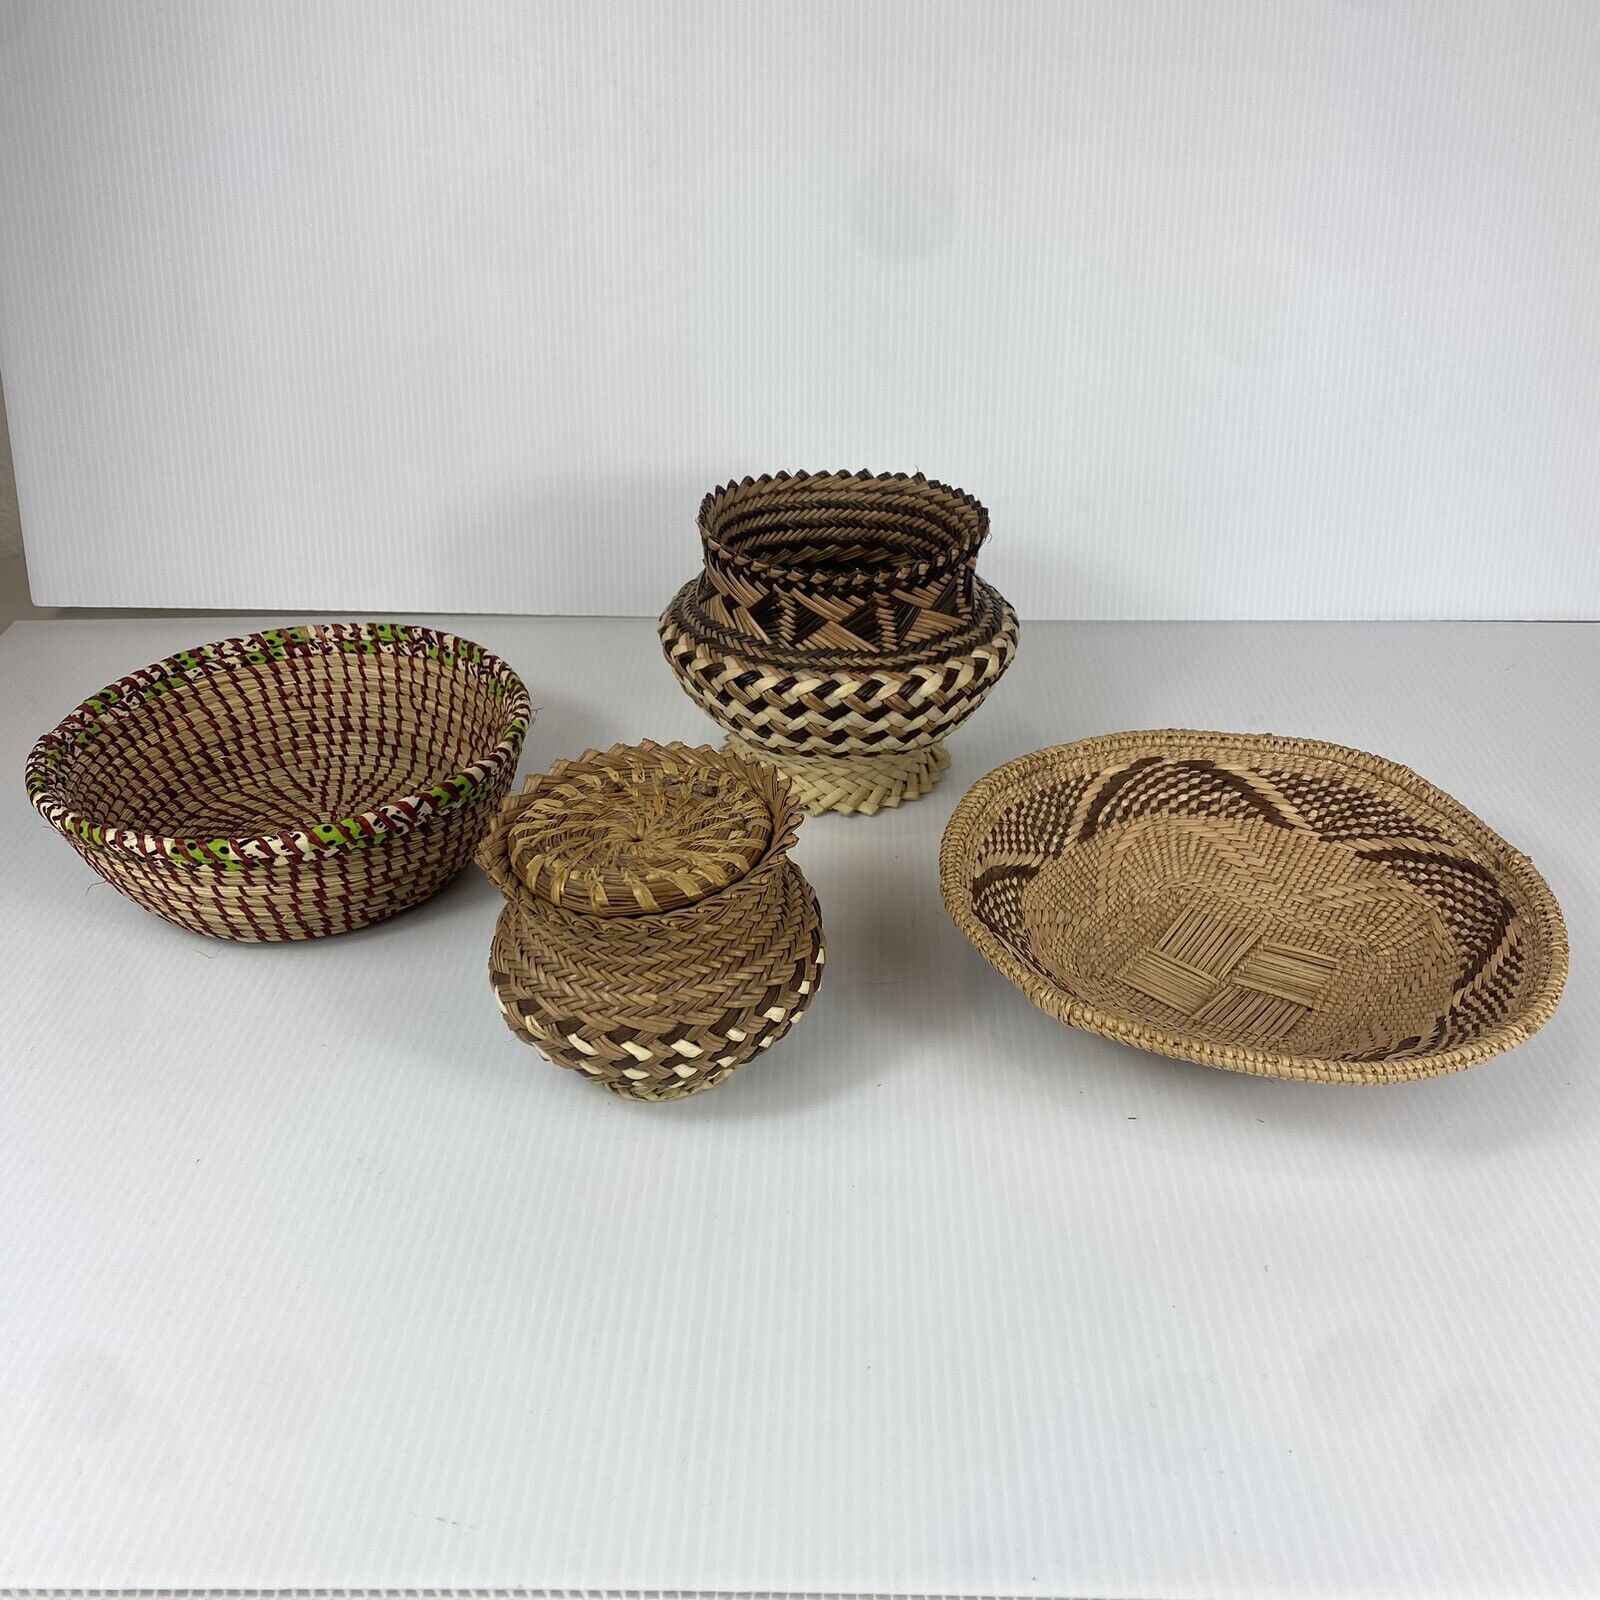 Vintage Botswana South Africa Basket Collection- 4 Pieces - Beautiful